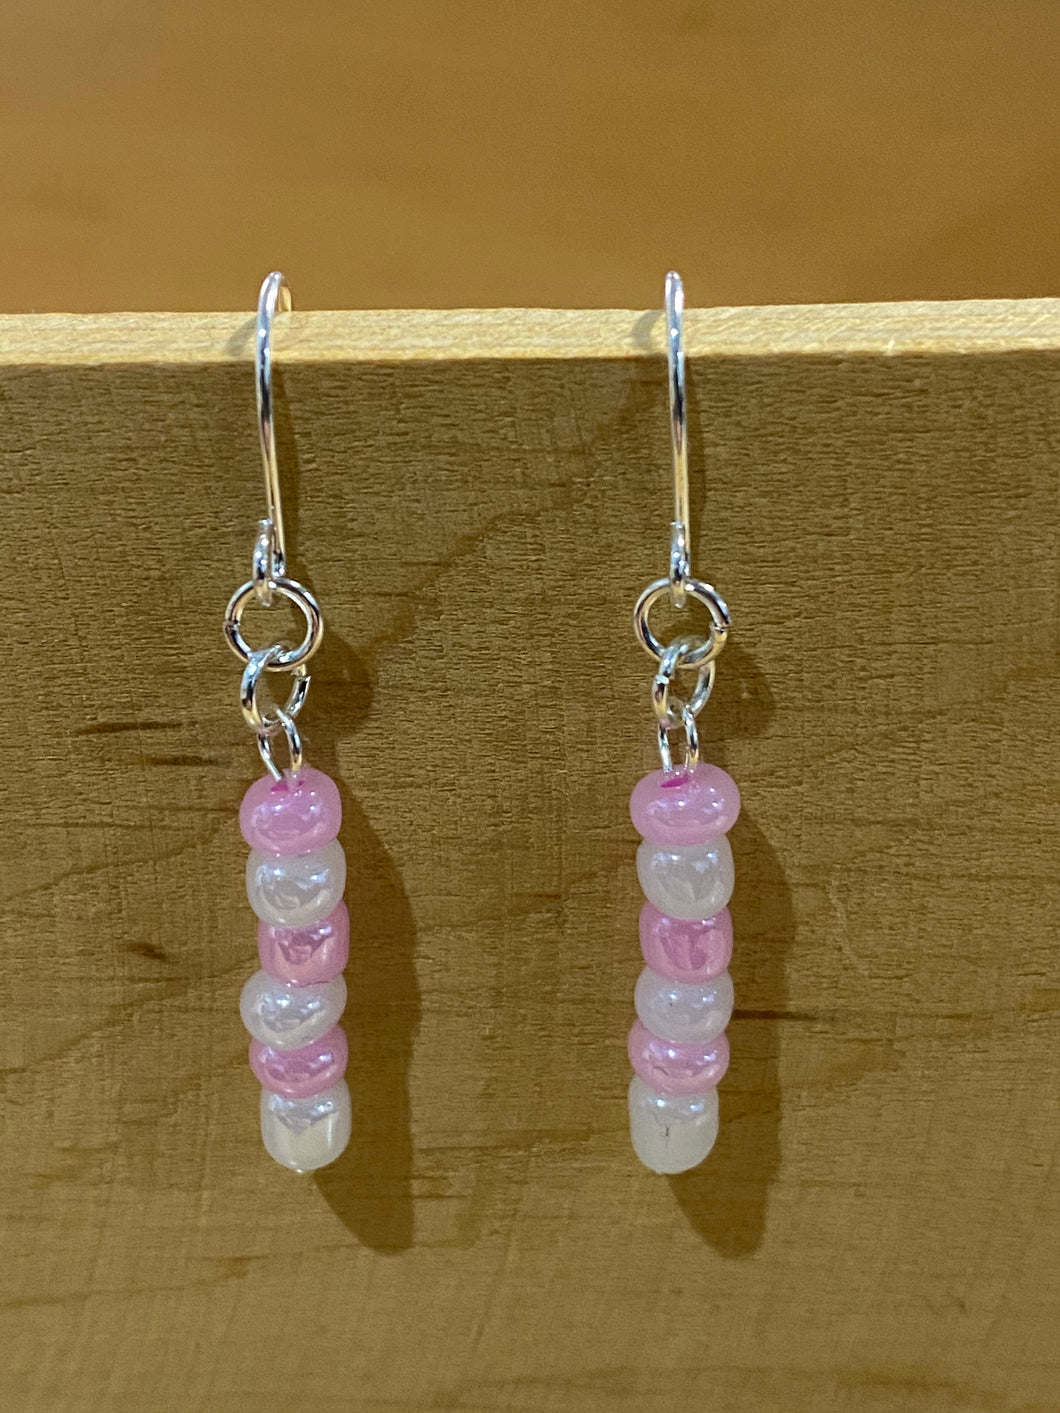 Beaded drop earrings with pearly white and light pink alternate beads, in a single strand with silver coloured earring hooks and and findings